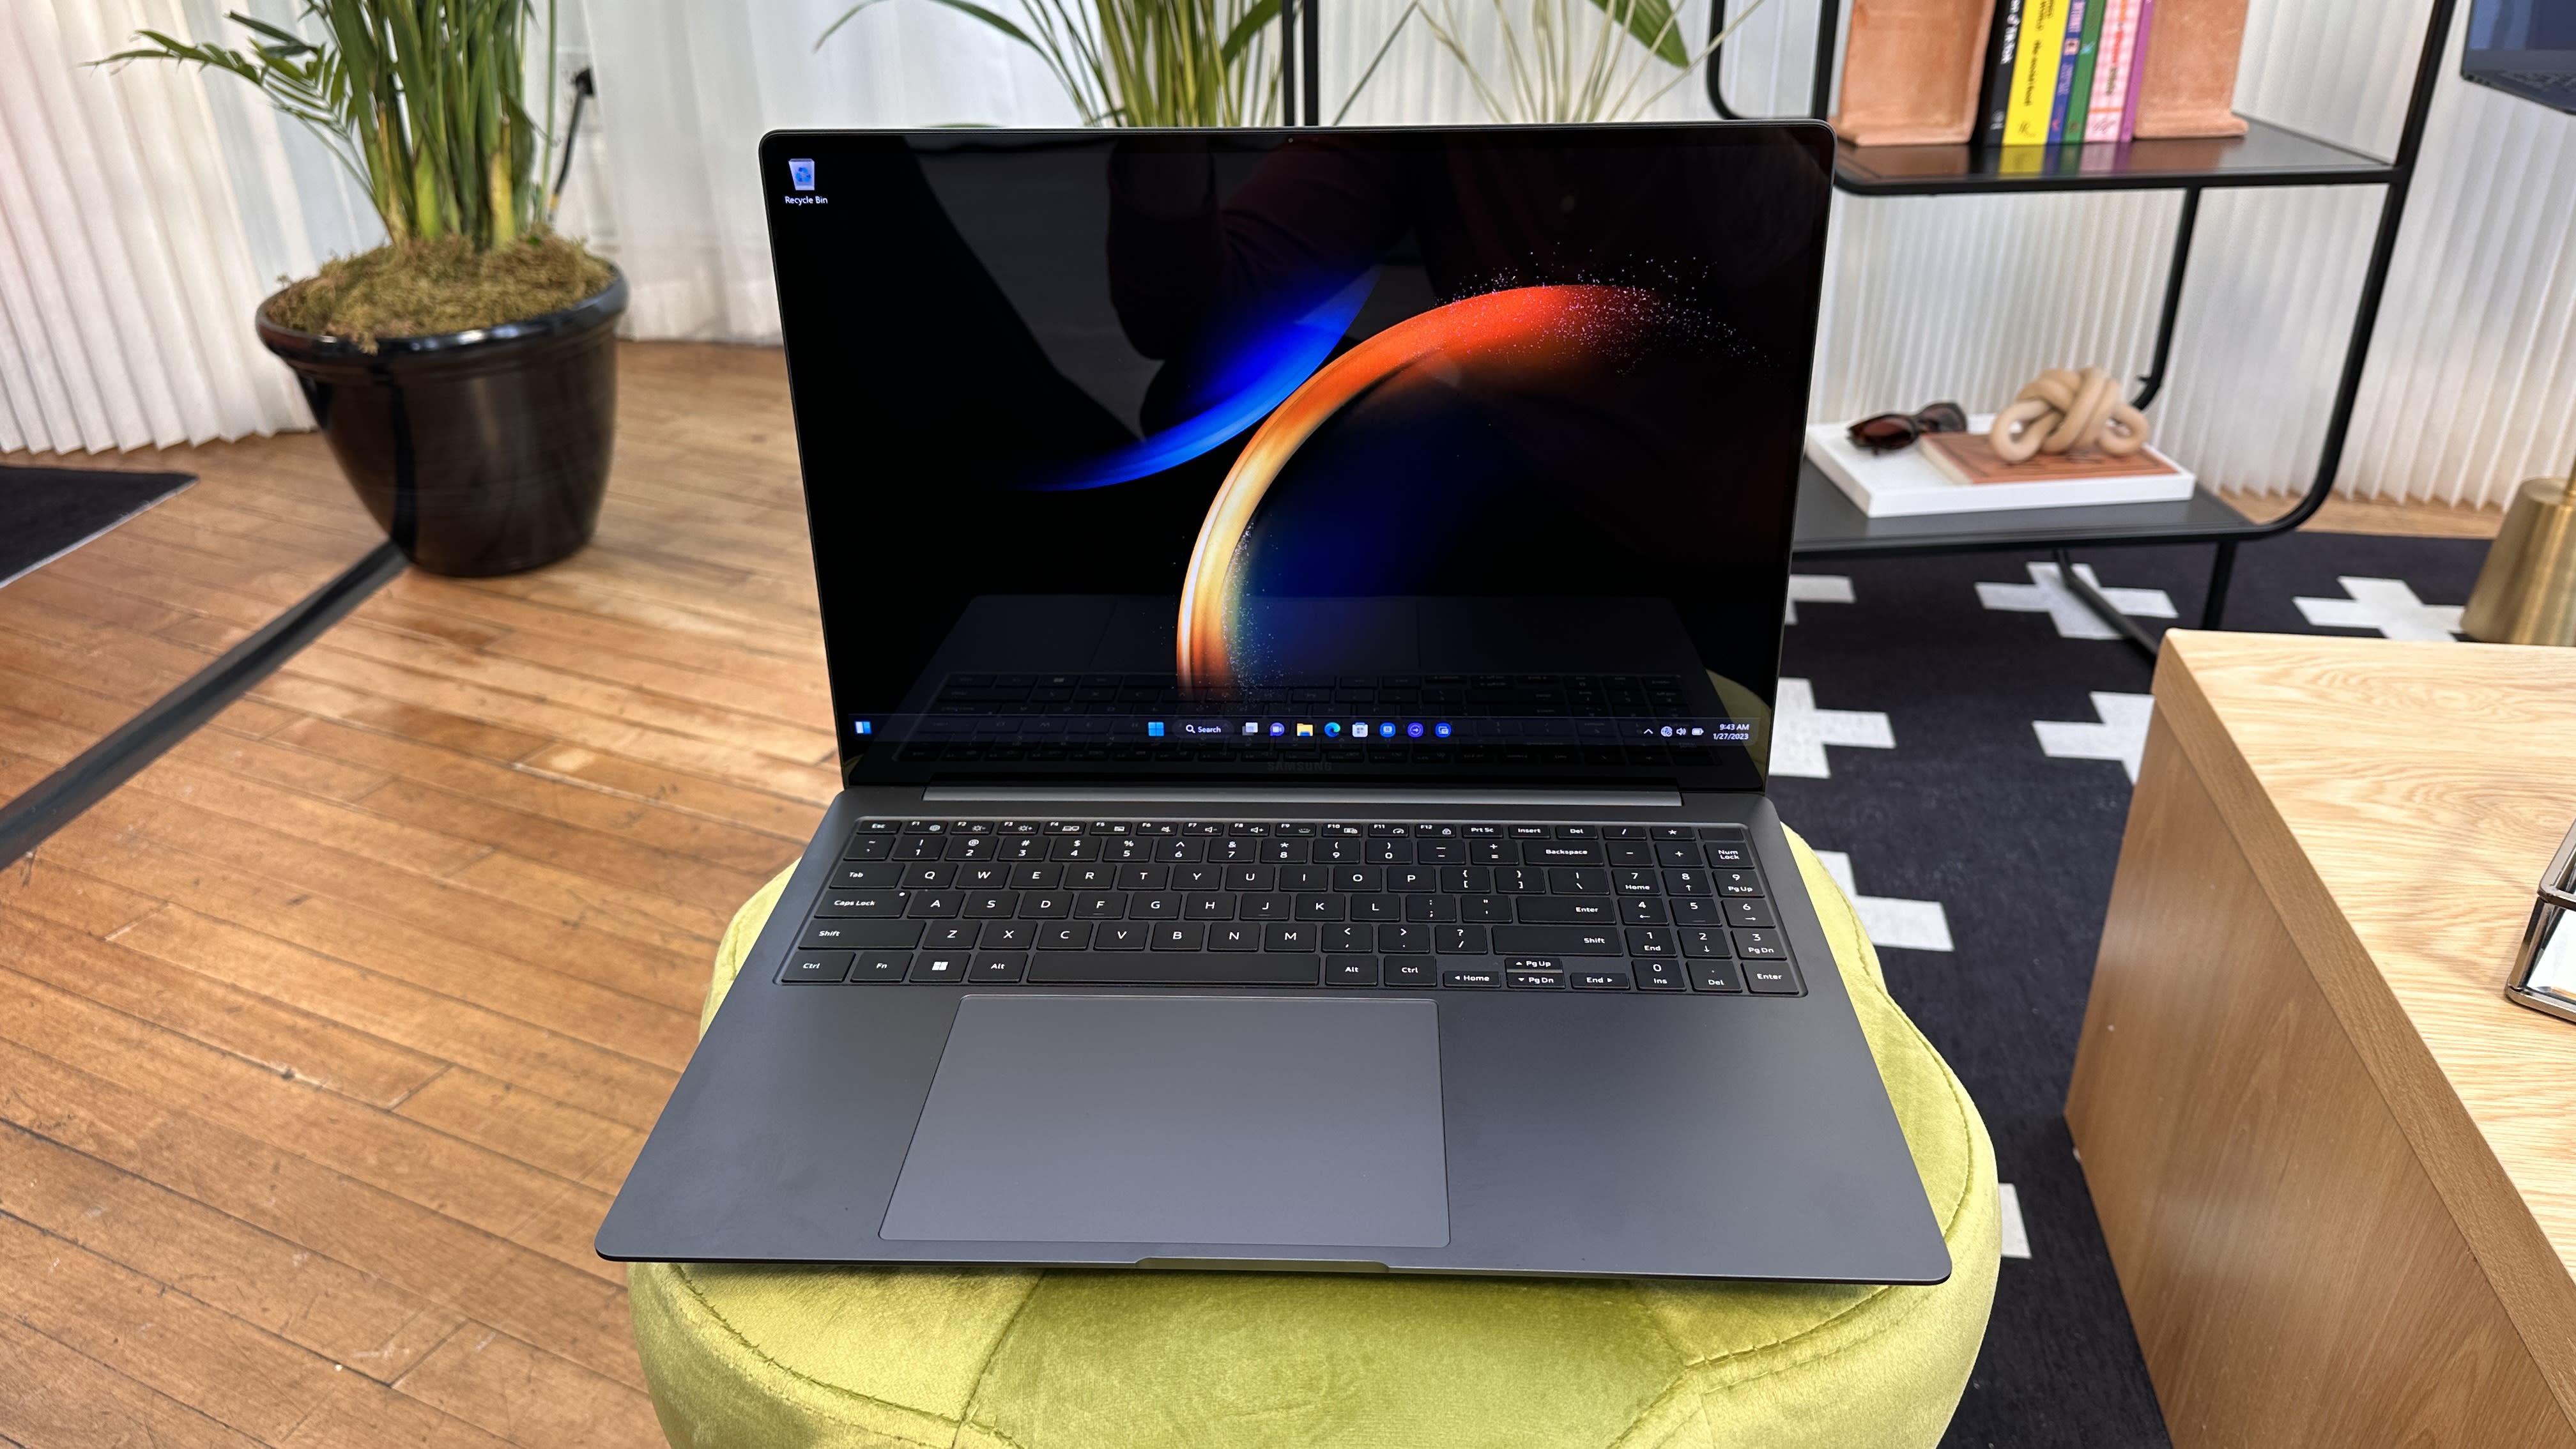 Samsung Galaxy Book 3 Pro 360: Hands-on and how to preorder